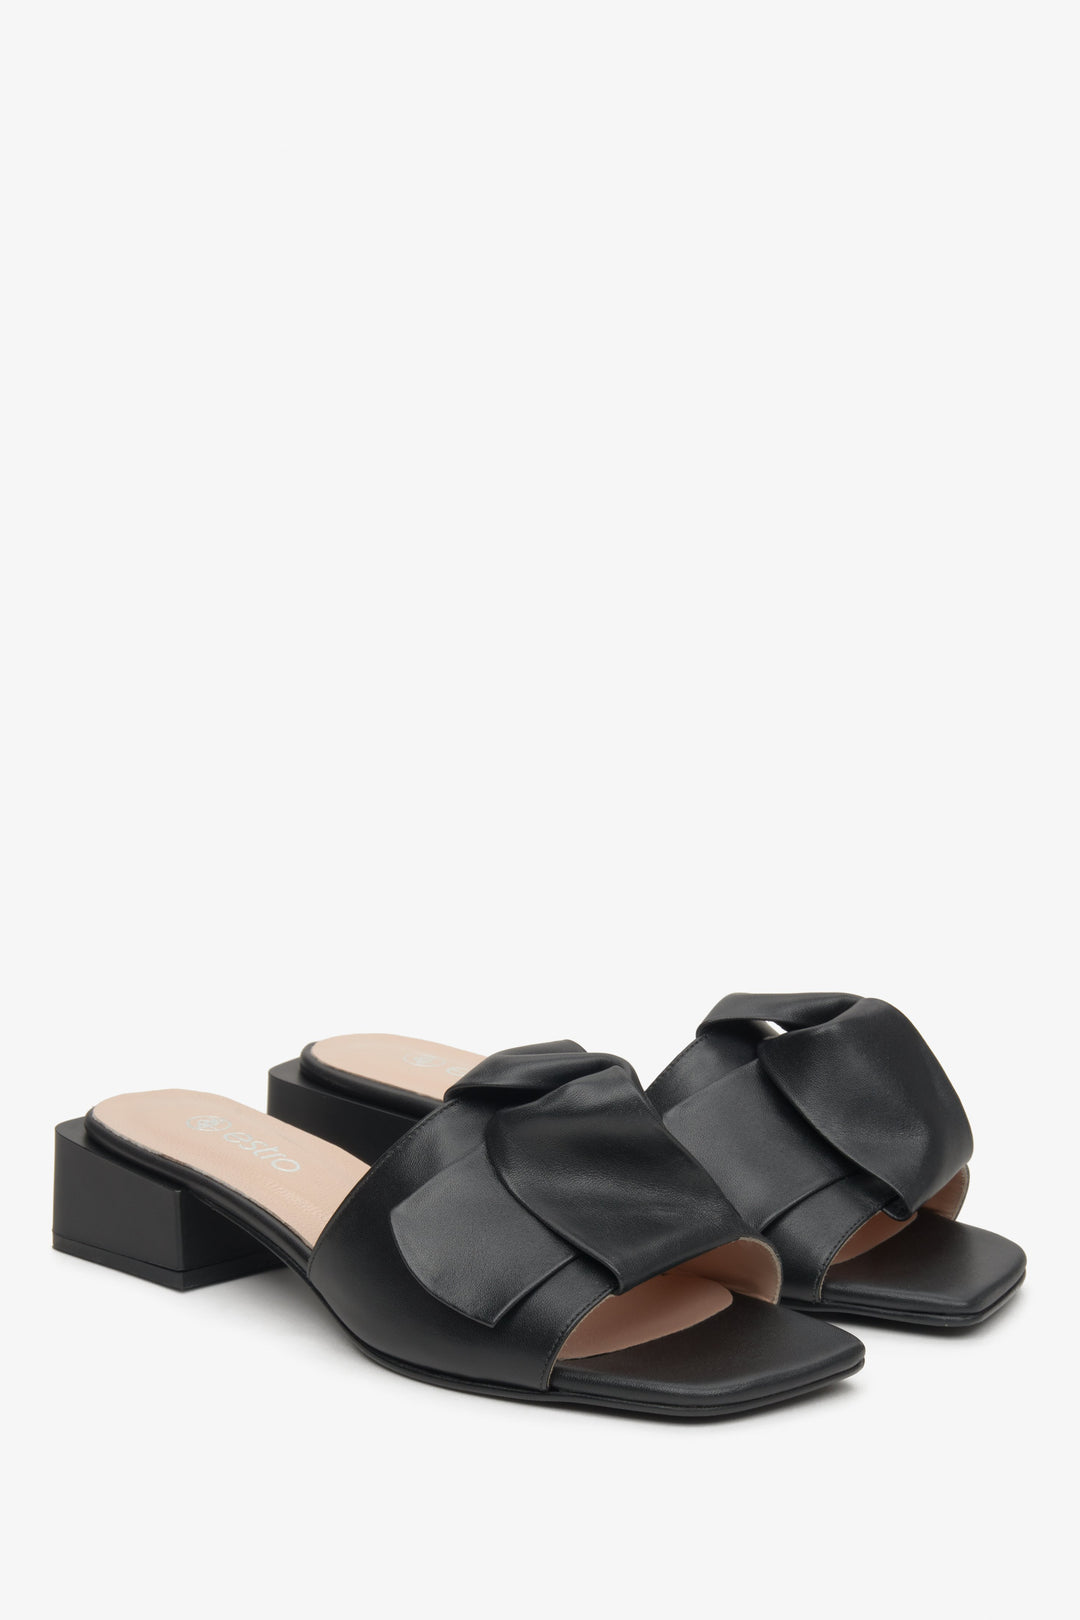 Women's black leather mules with a bow by Estro.